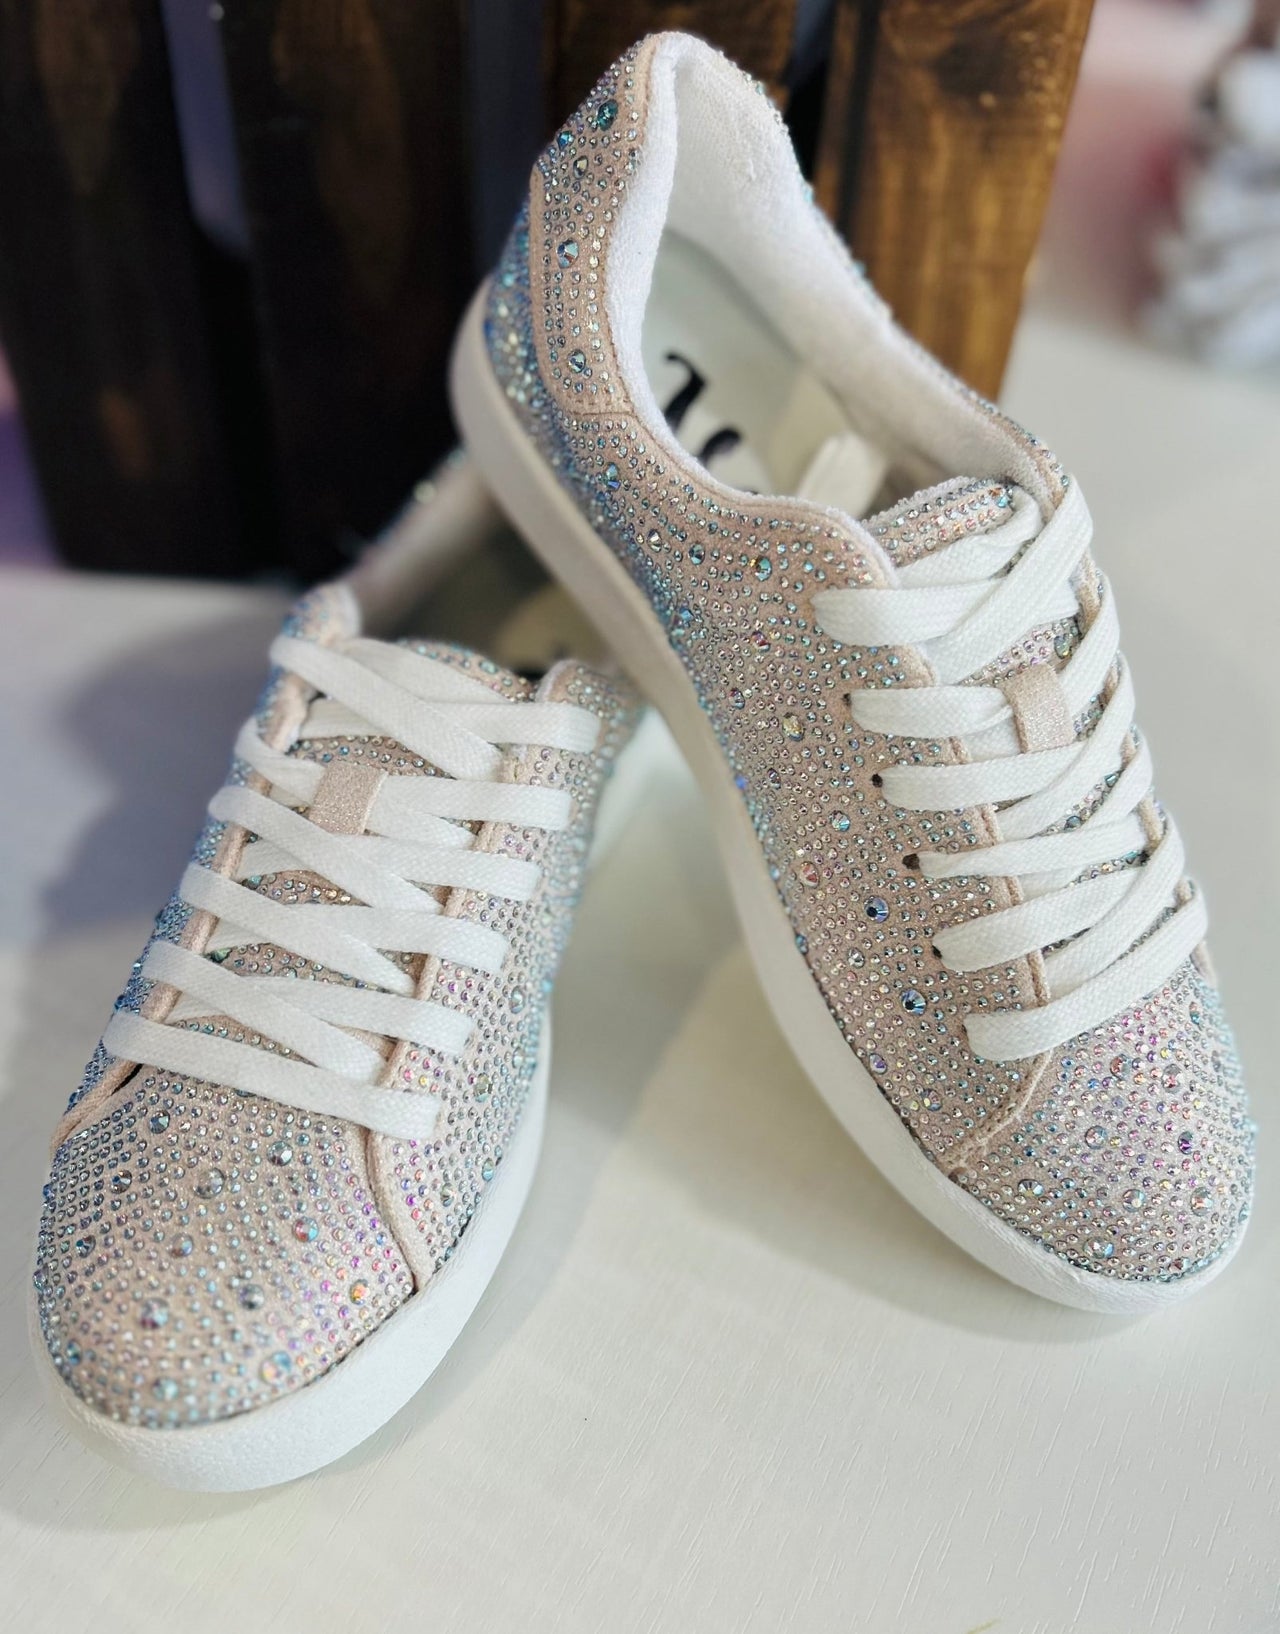 The So Flirty Tennis Shoes - Hey Heifer Boutique